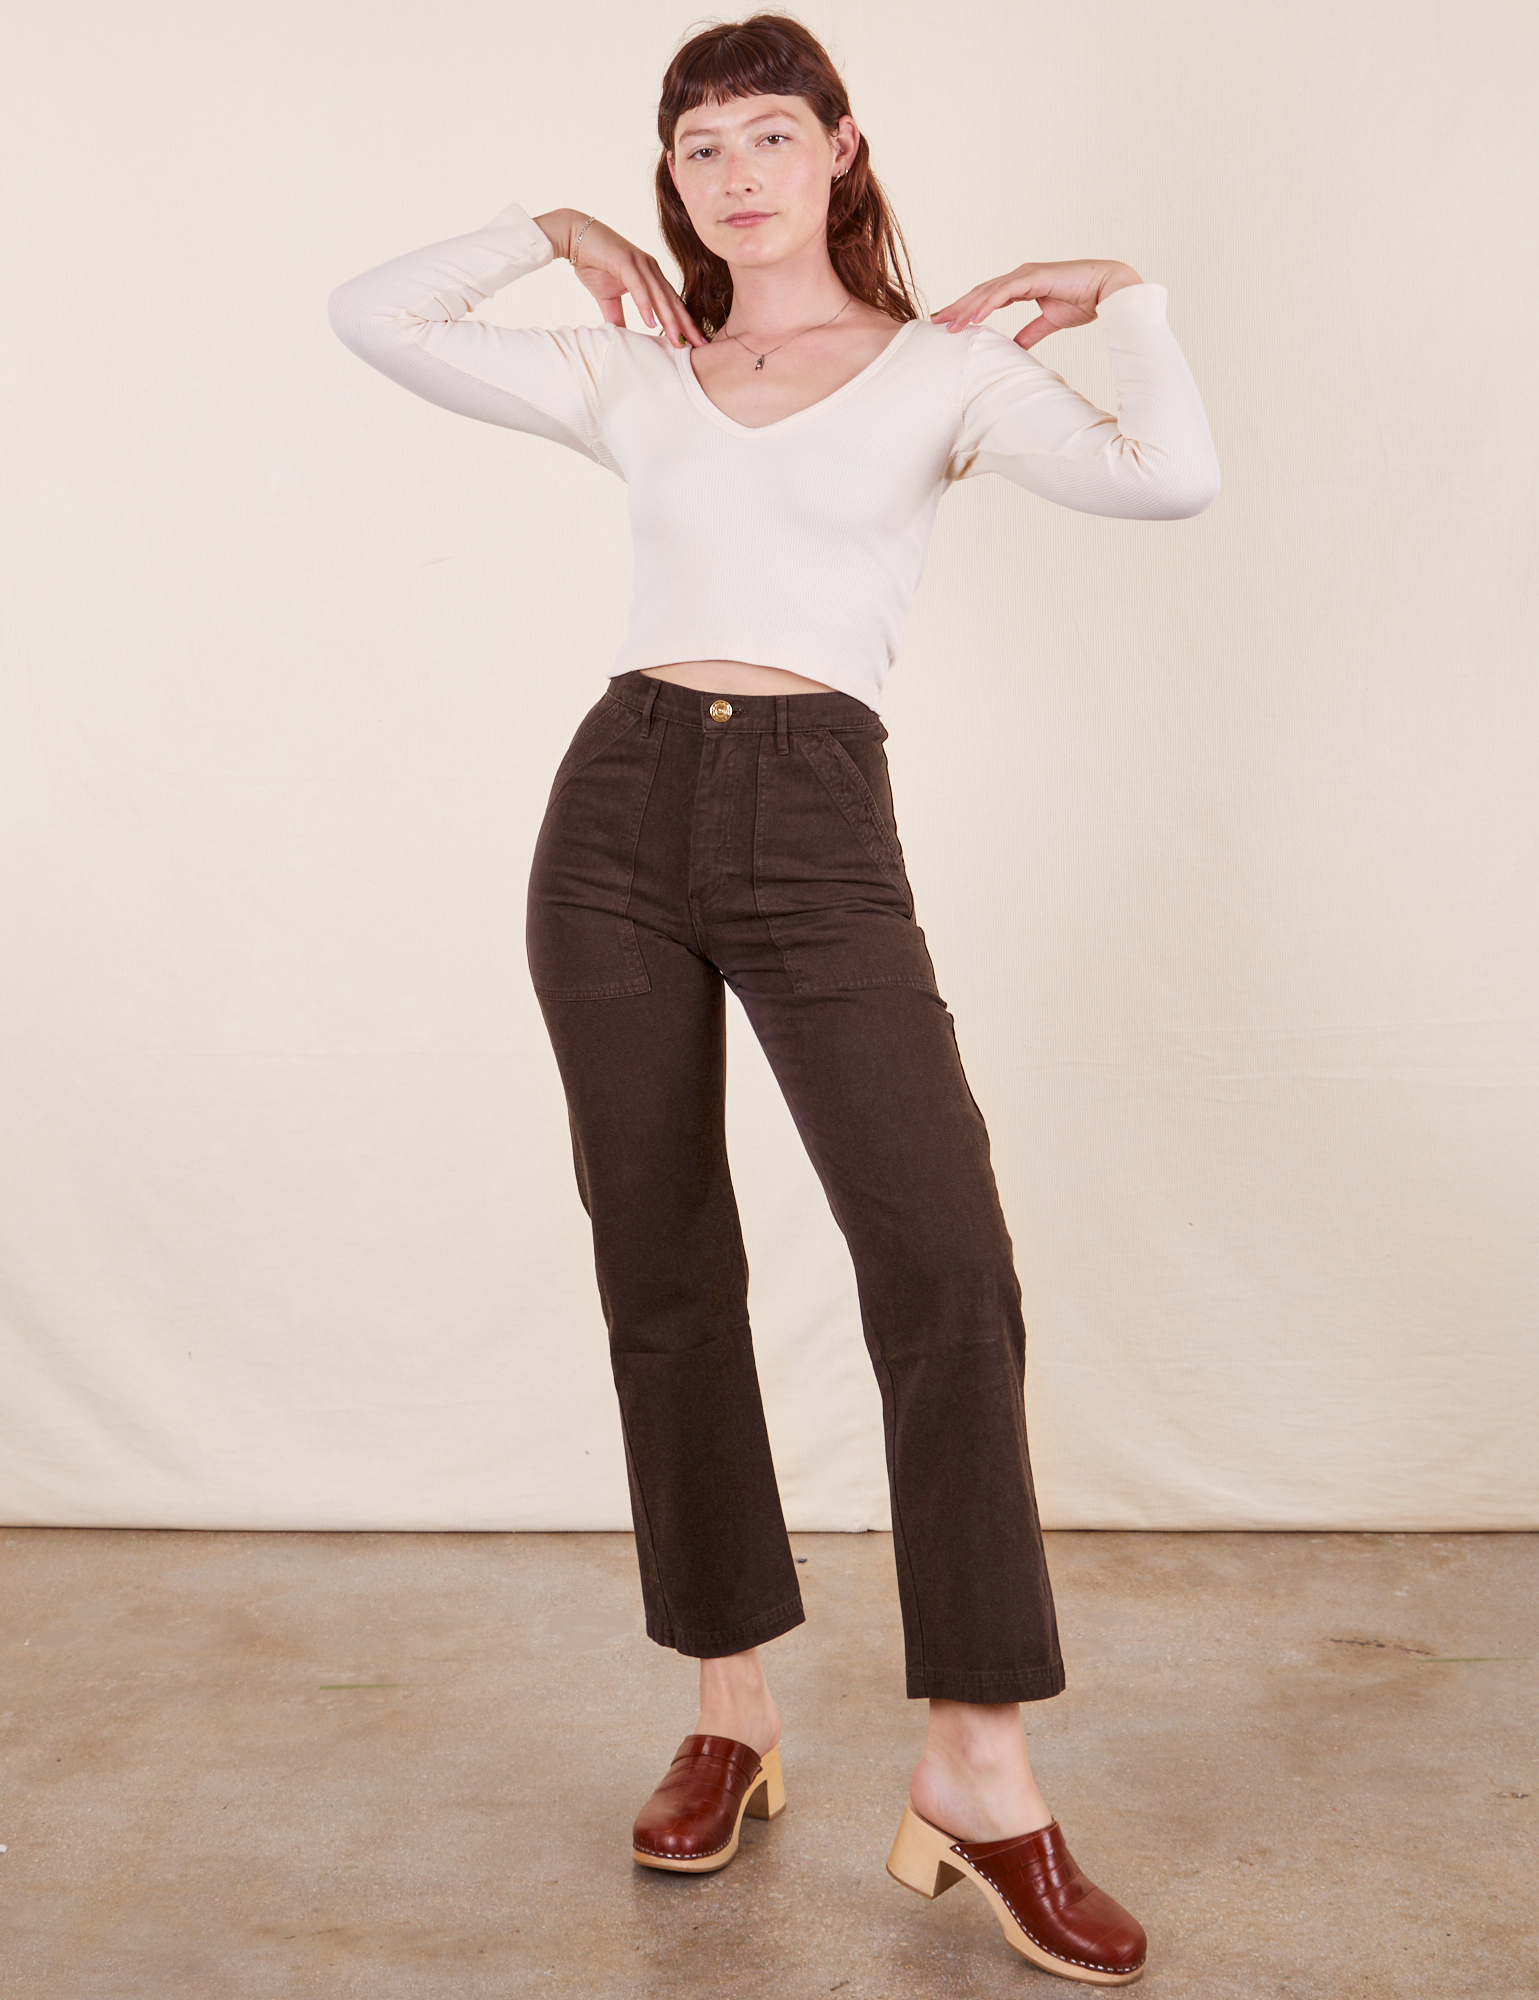 Alex is 5&#39;8&quot; and wearing XS Work Pants in Espresso Brown paired with vintage off-white Long Sleeve V-Neck Tee